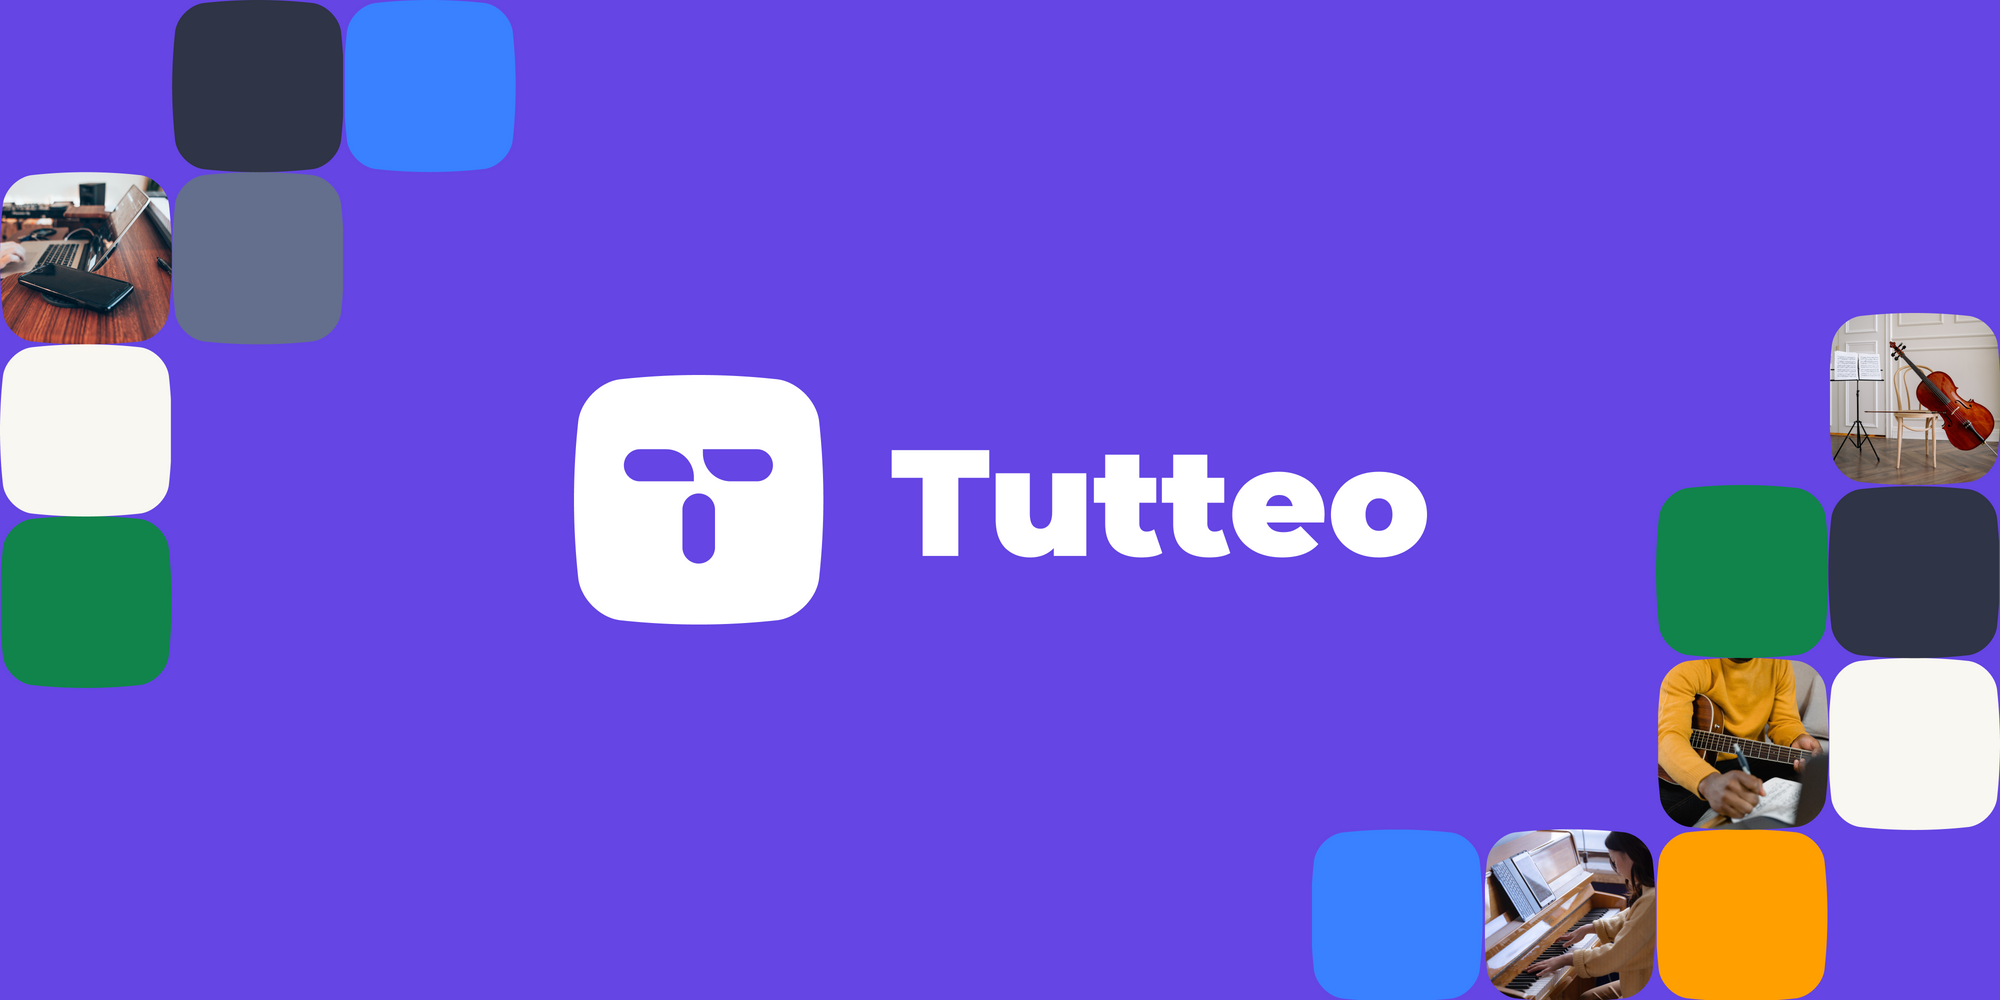 Tutteo site is live!